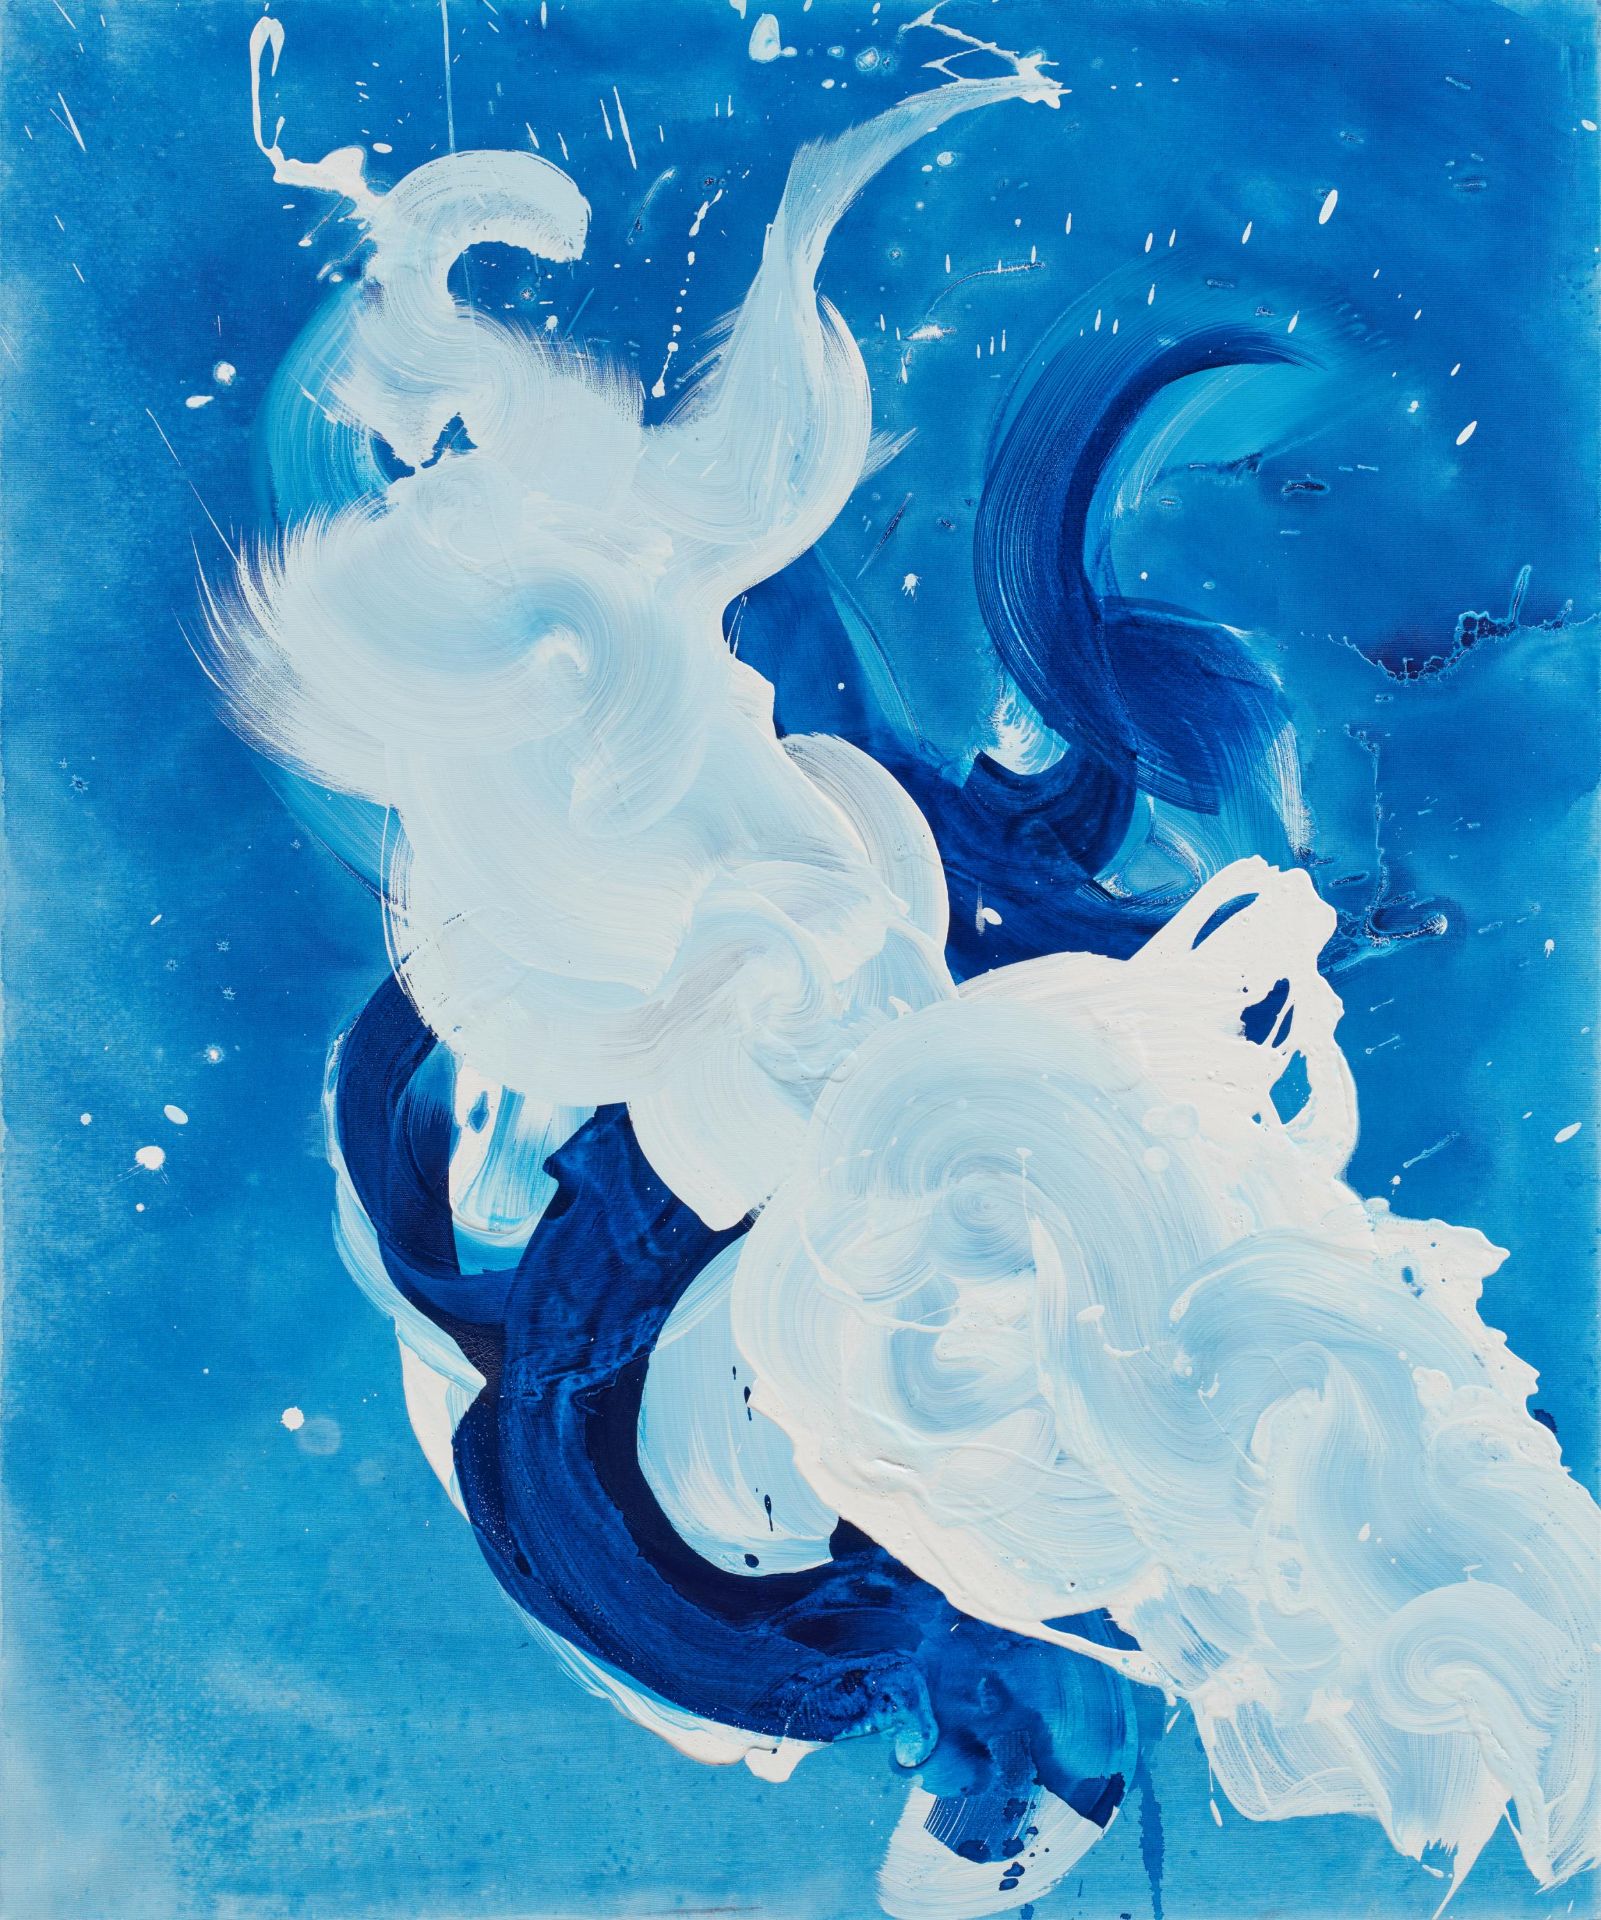 Conor Mccreedy: Blue and White Ocean - Image 5 of 8